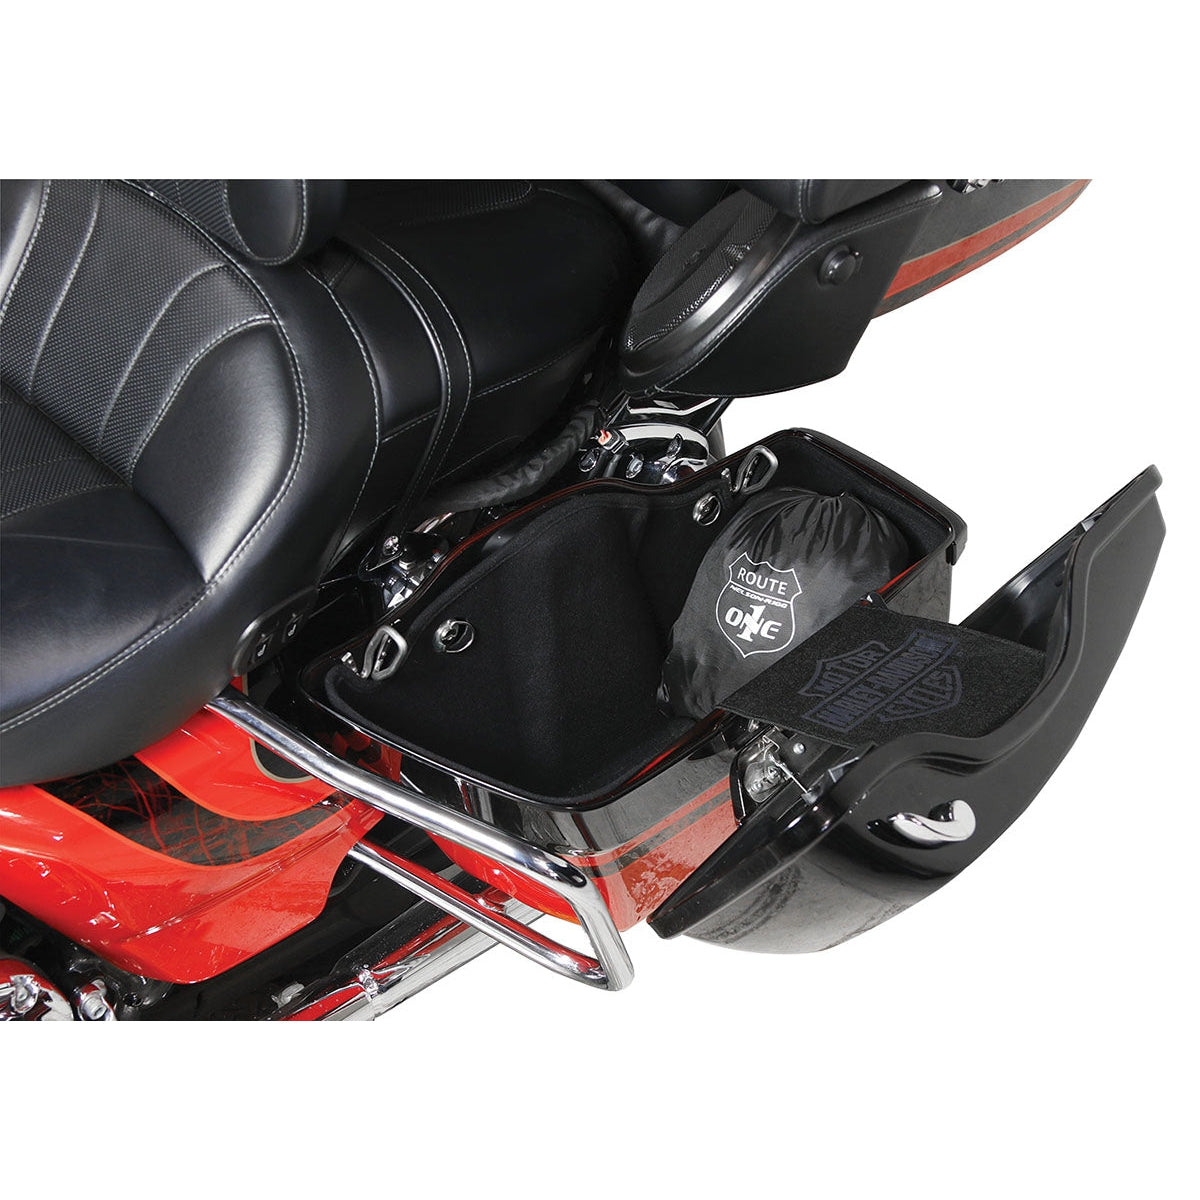 Nelson-Rigg DEX-RT1H Defender Extreme Touring and Adventure Motorcycle Half-Cover